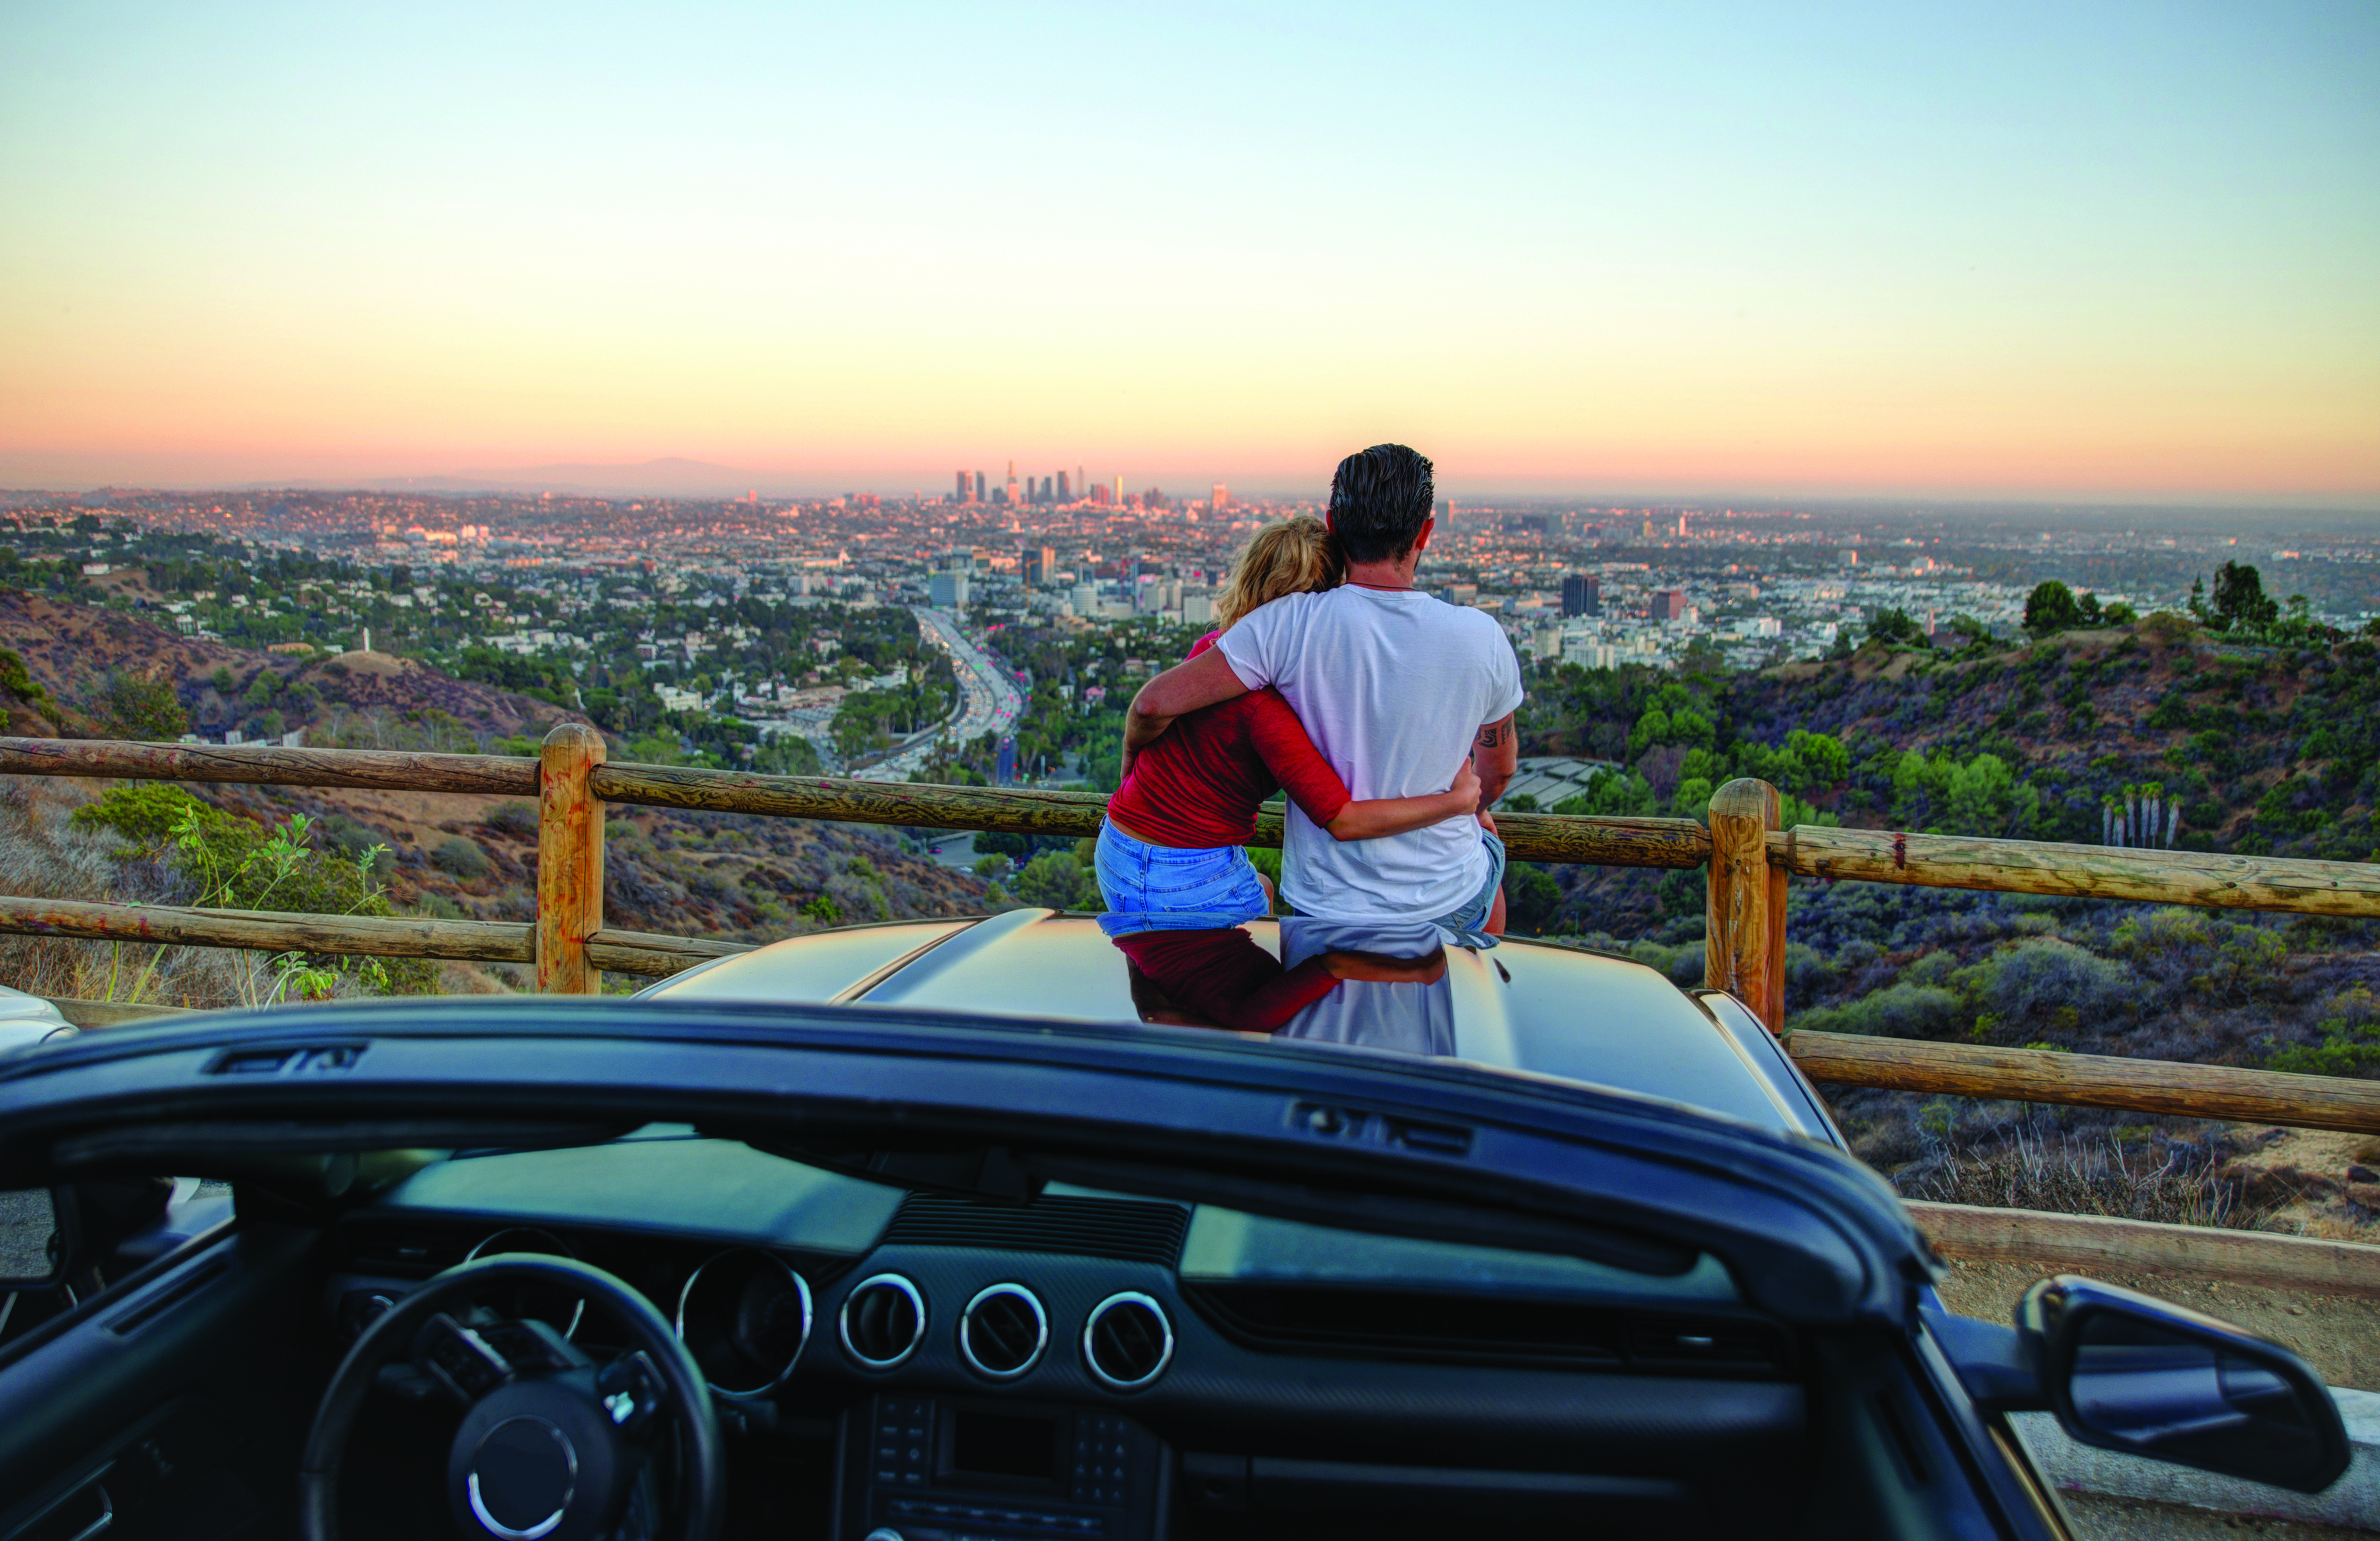 Couple overlooking Los Angeles at sunset